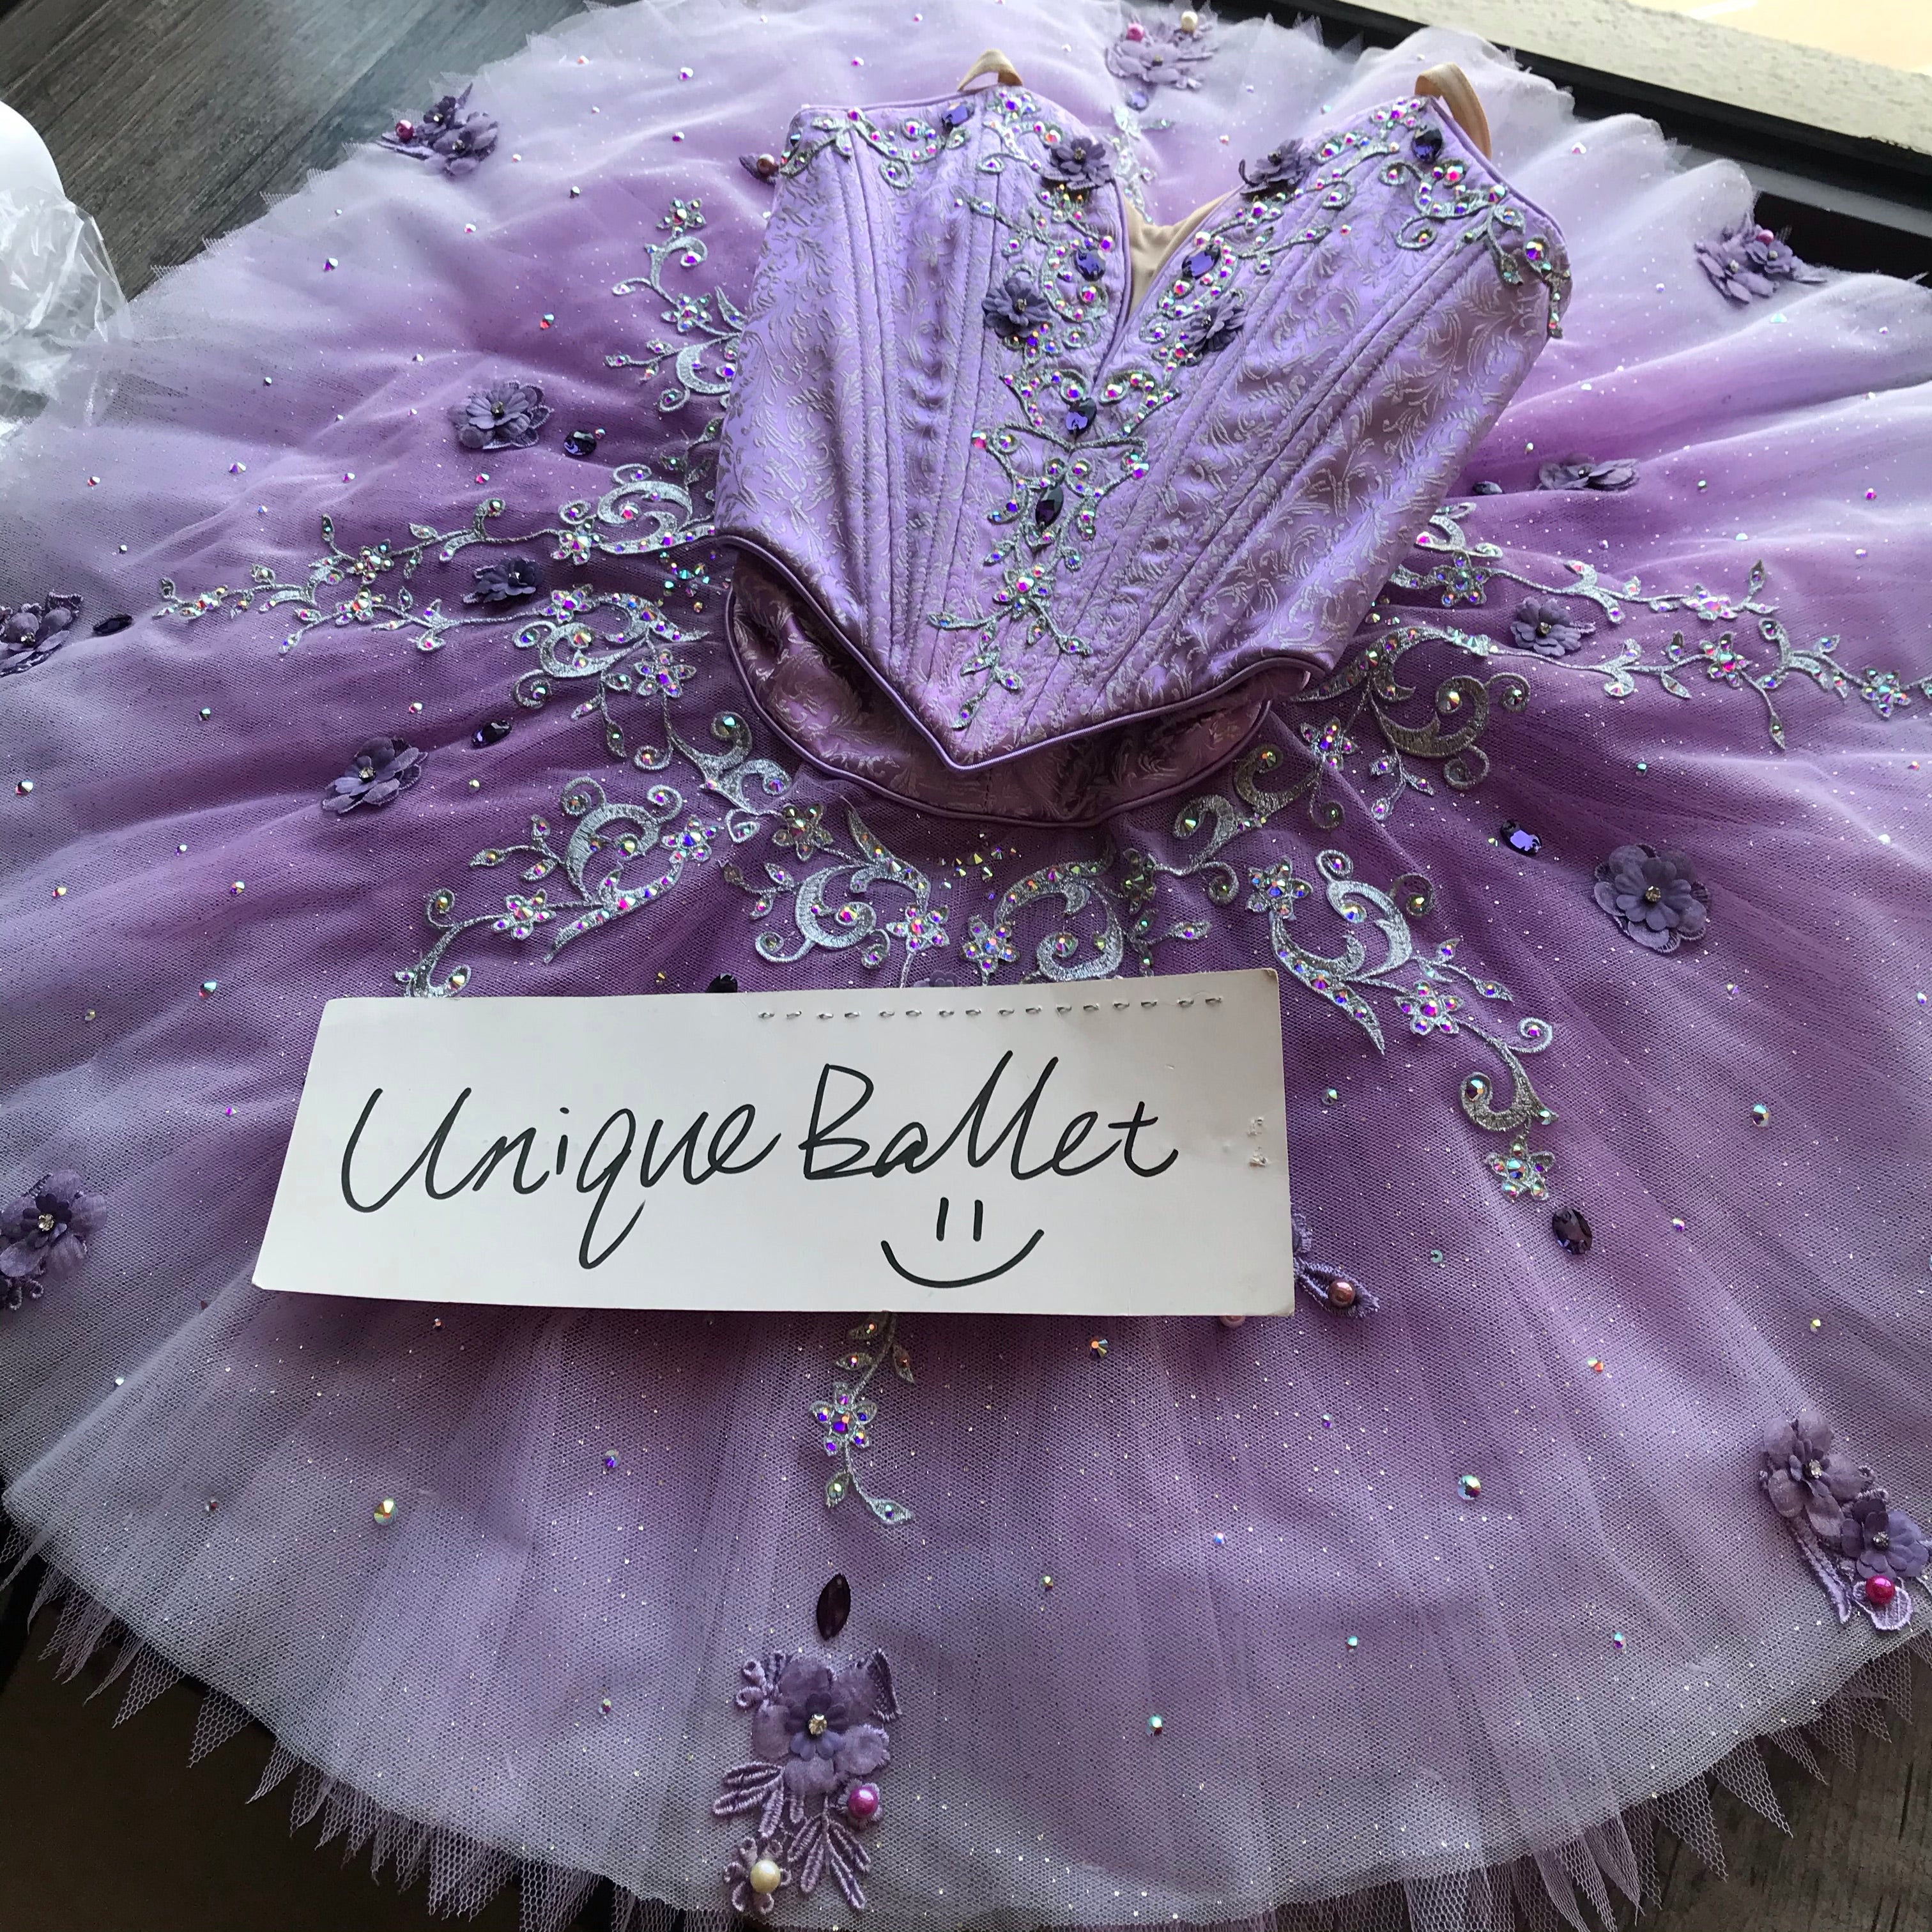 **Sample Discount**High-end Professional Lilac Fairy Classical Ballet TuTu Costume 2 Pieces France Style YAGP Ballet Costume Dance Wear